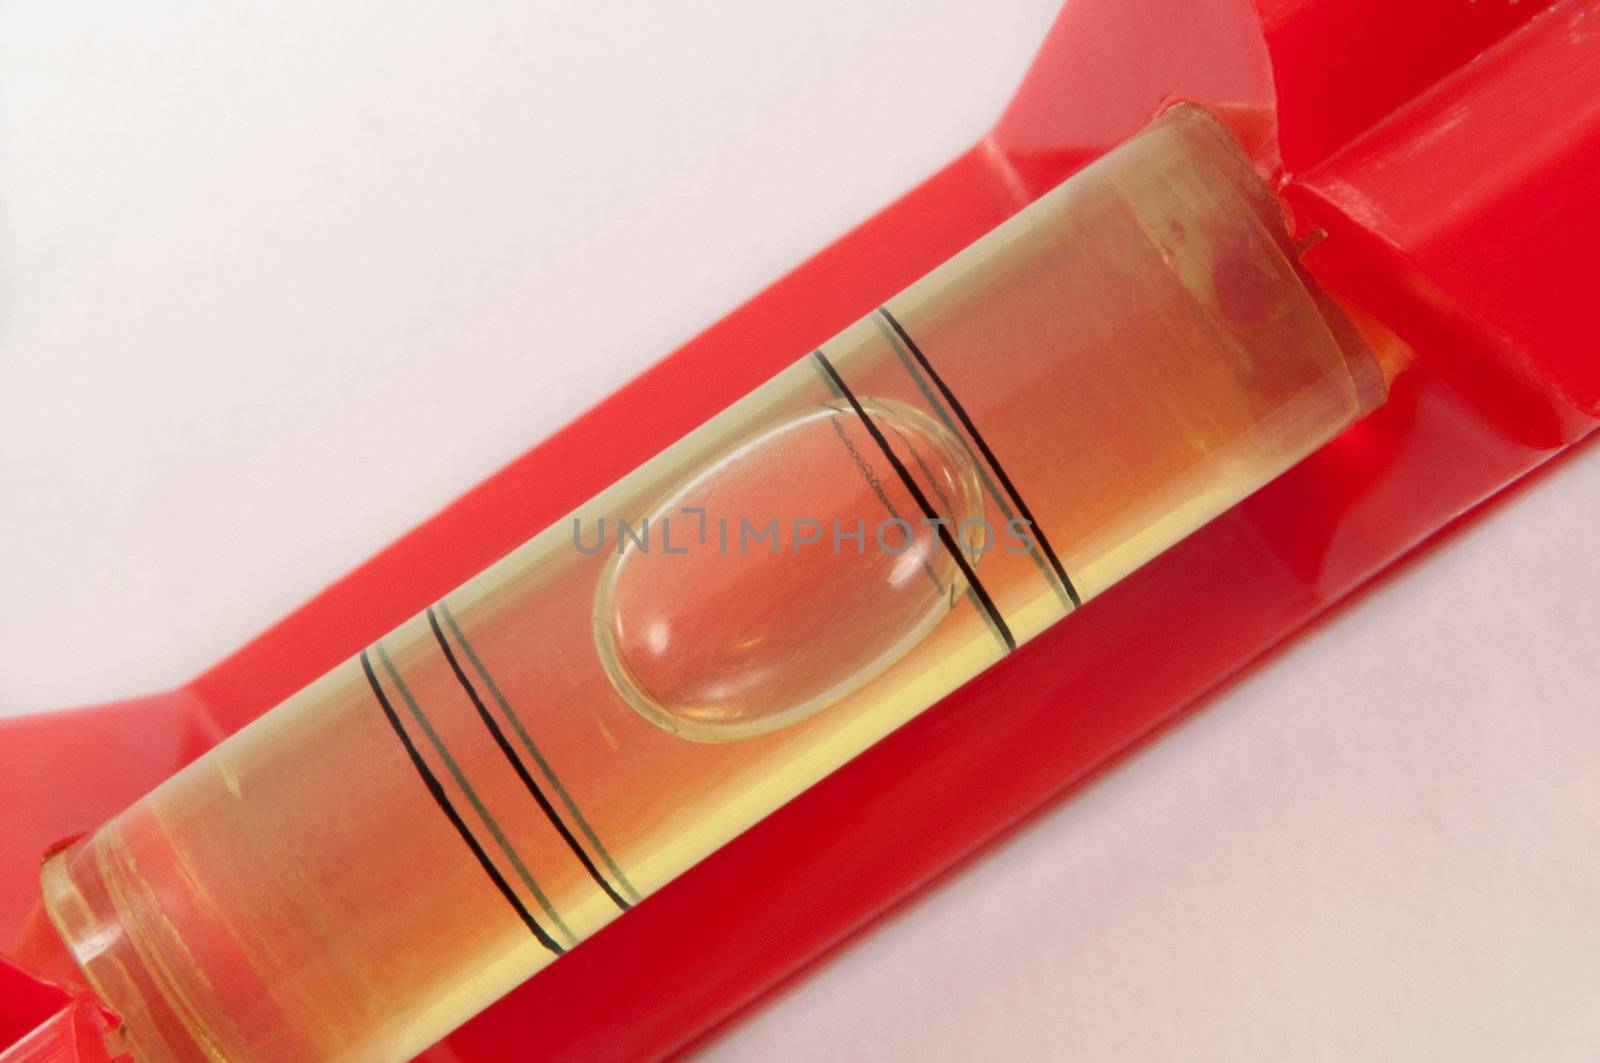 Close up of a red spirit level captured diagonally across the image with white background.